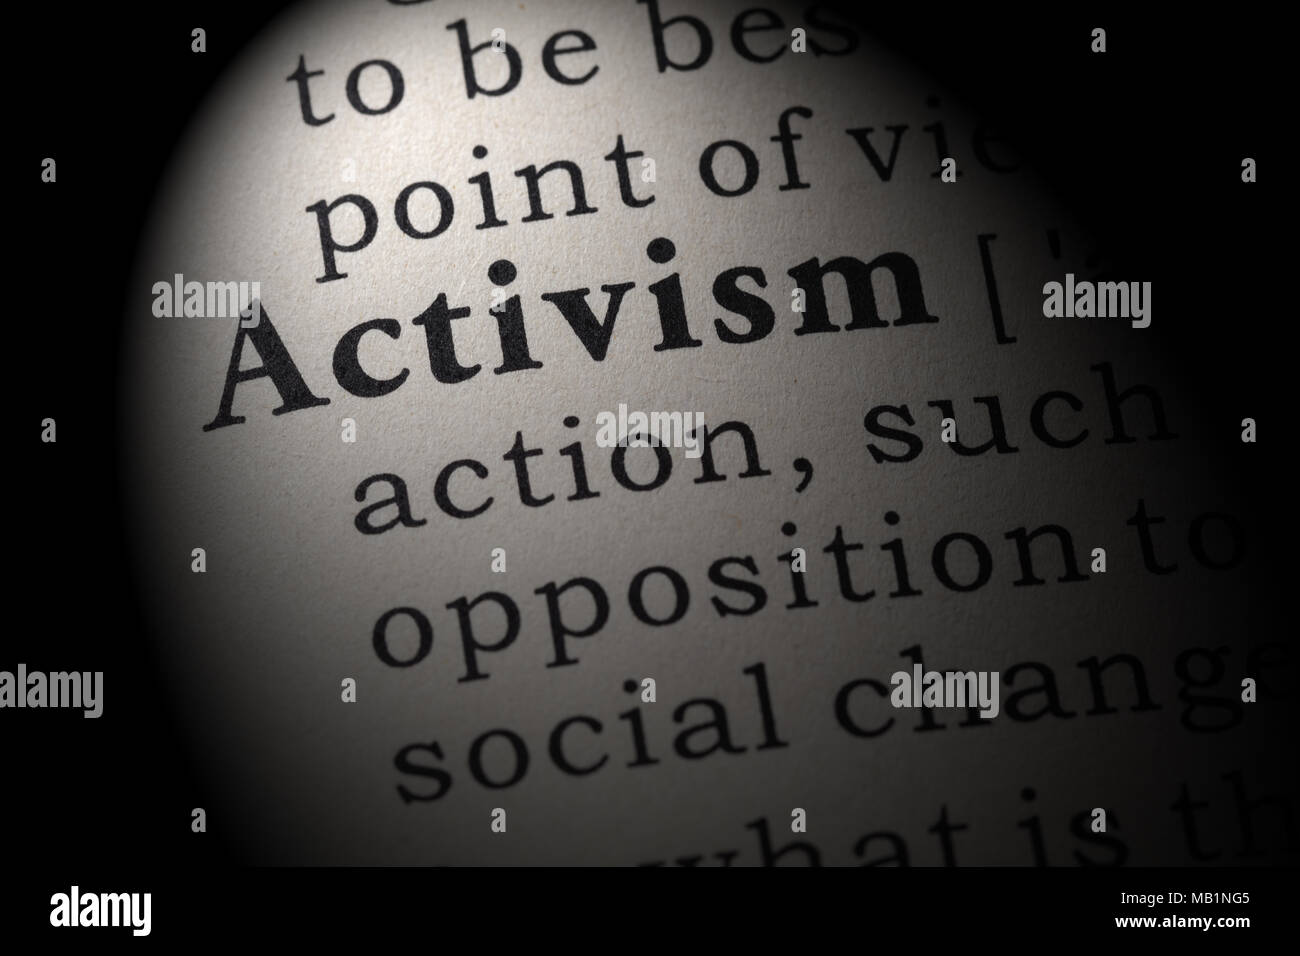 Fake Dictionary, Dictionary definition of the word activism. including key descriptive words. Stock Photo